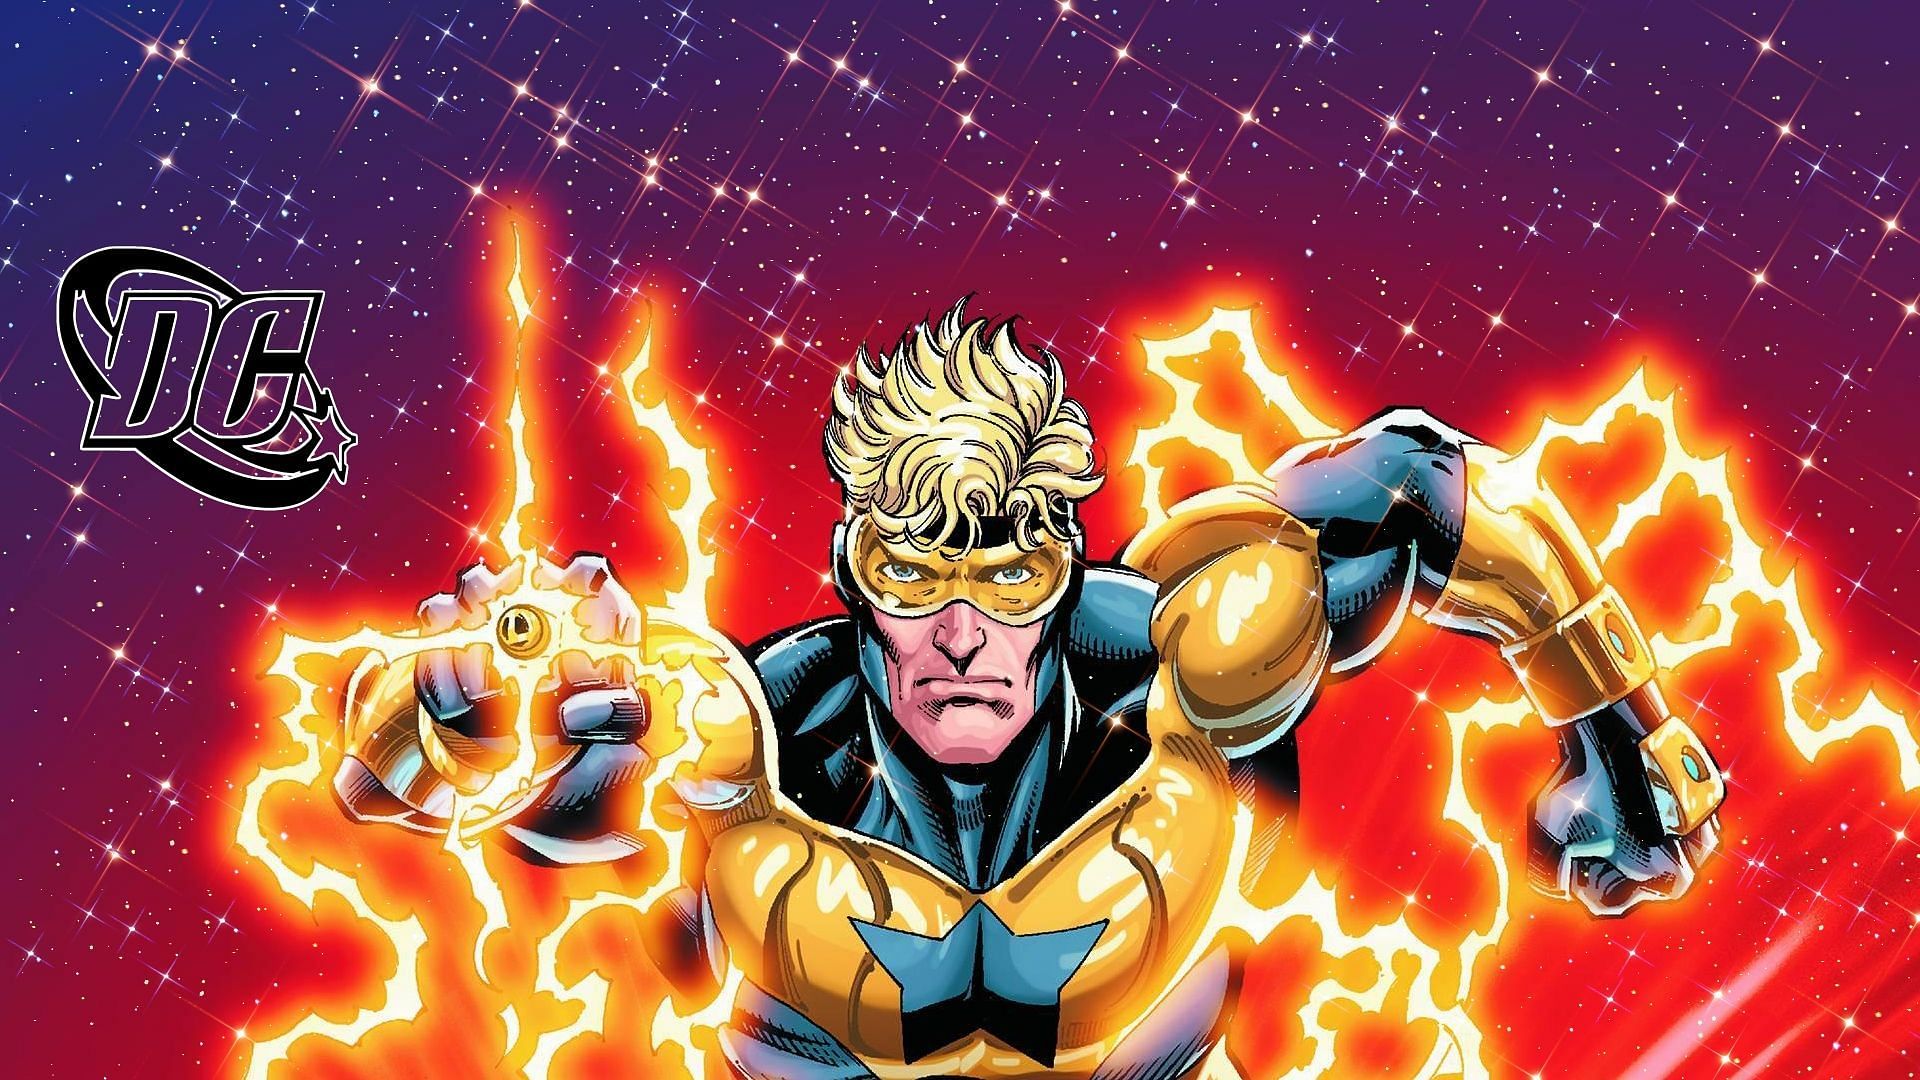 Booster Gold&rsquo;s real name is Michael Jon Carter. (Image Via Sportskeeda)